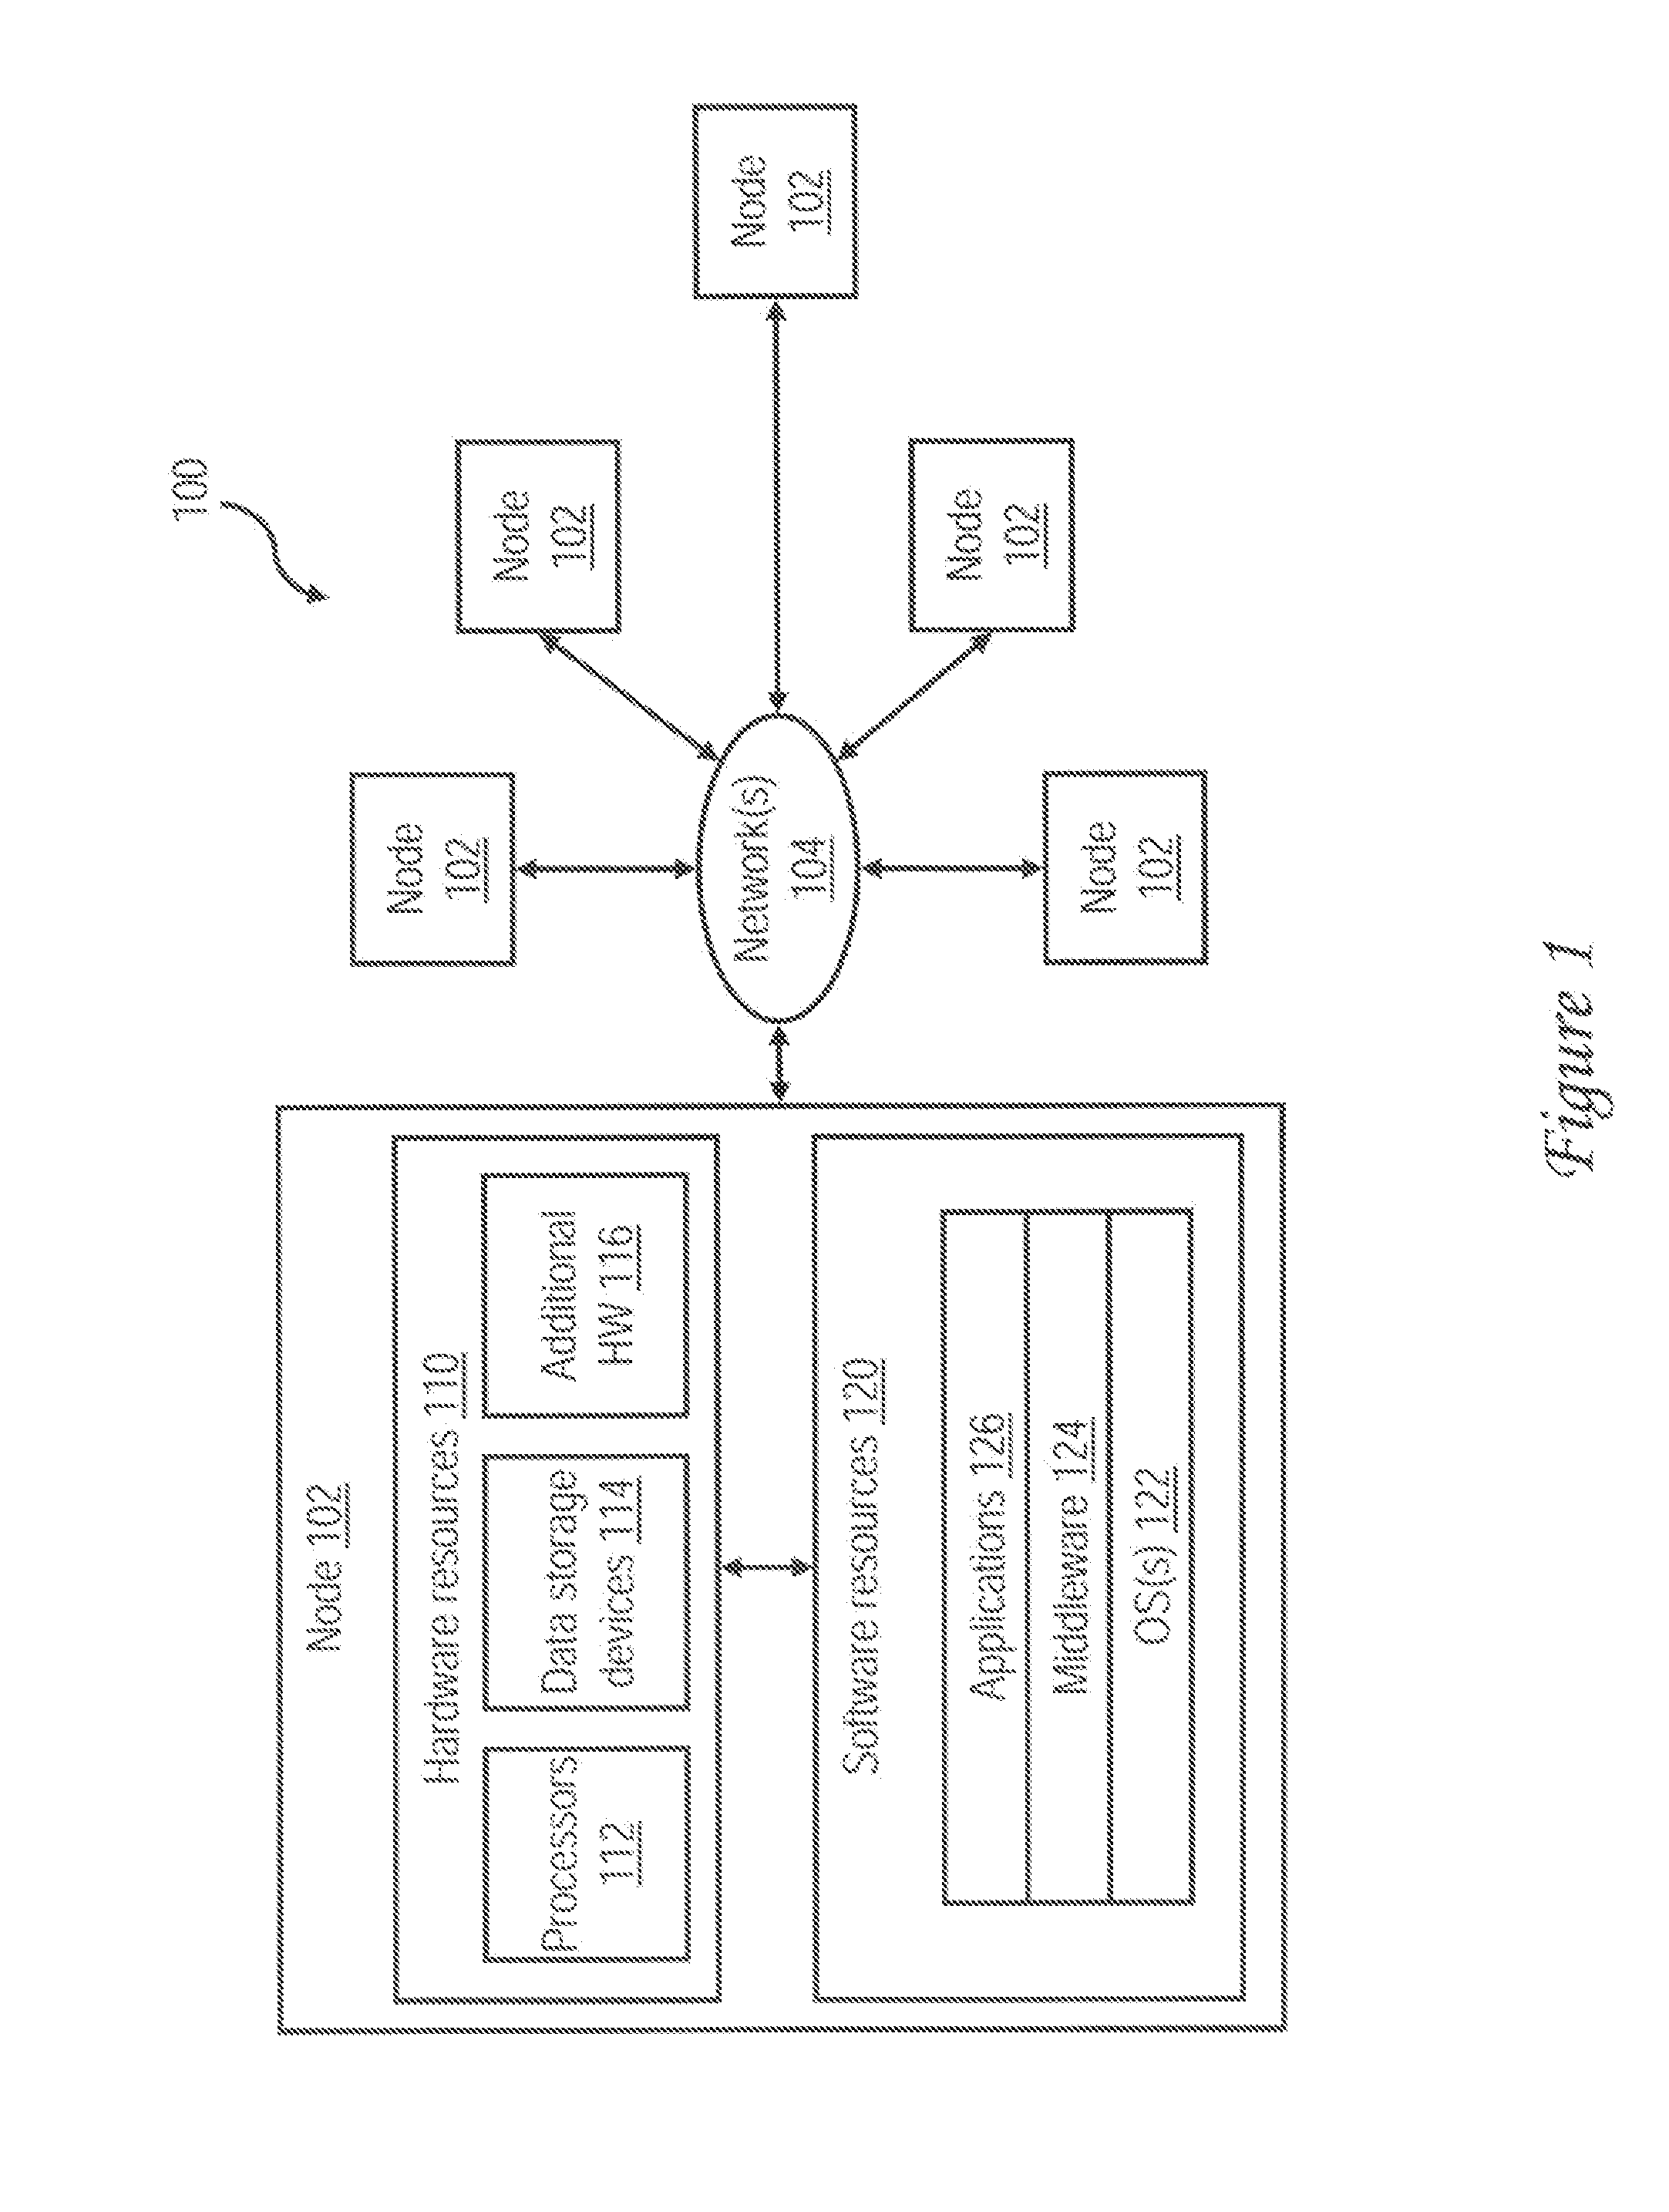 Self-assignment of node identifier in a cluster system